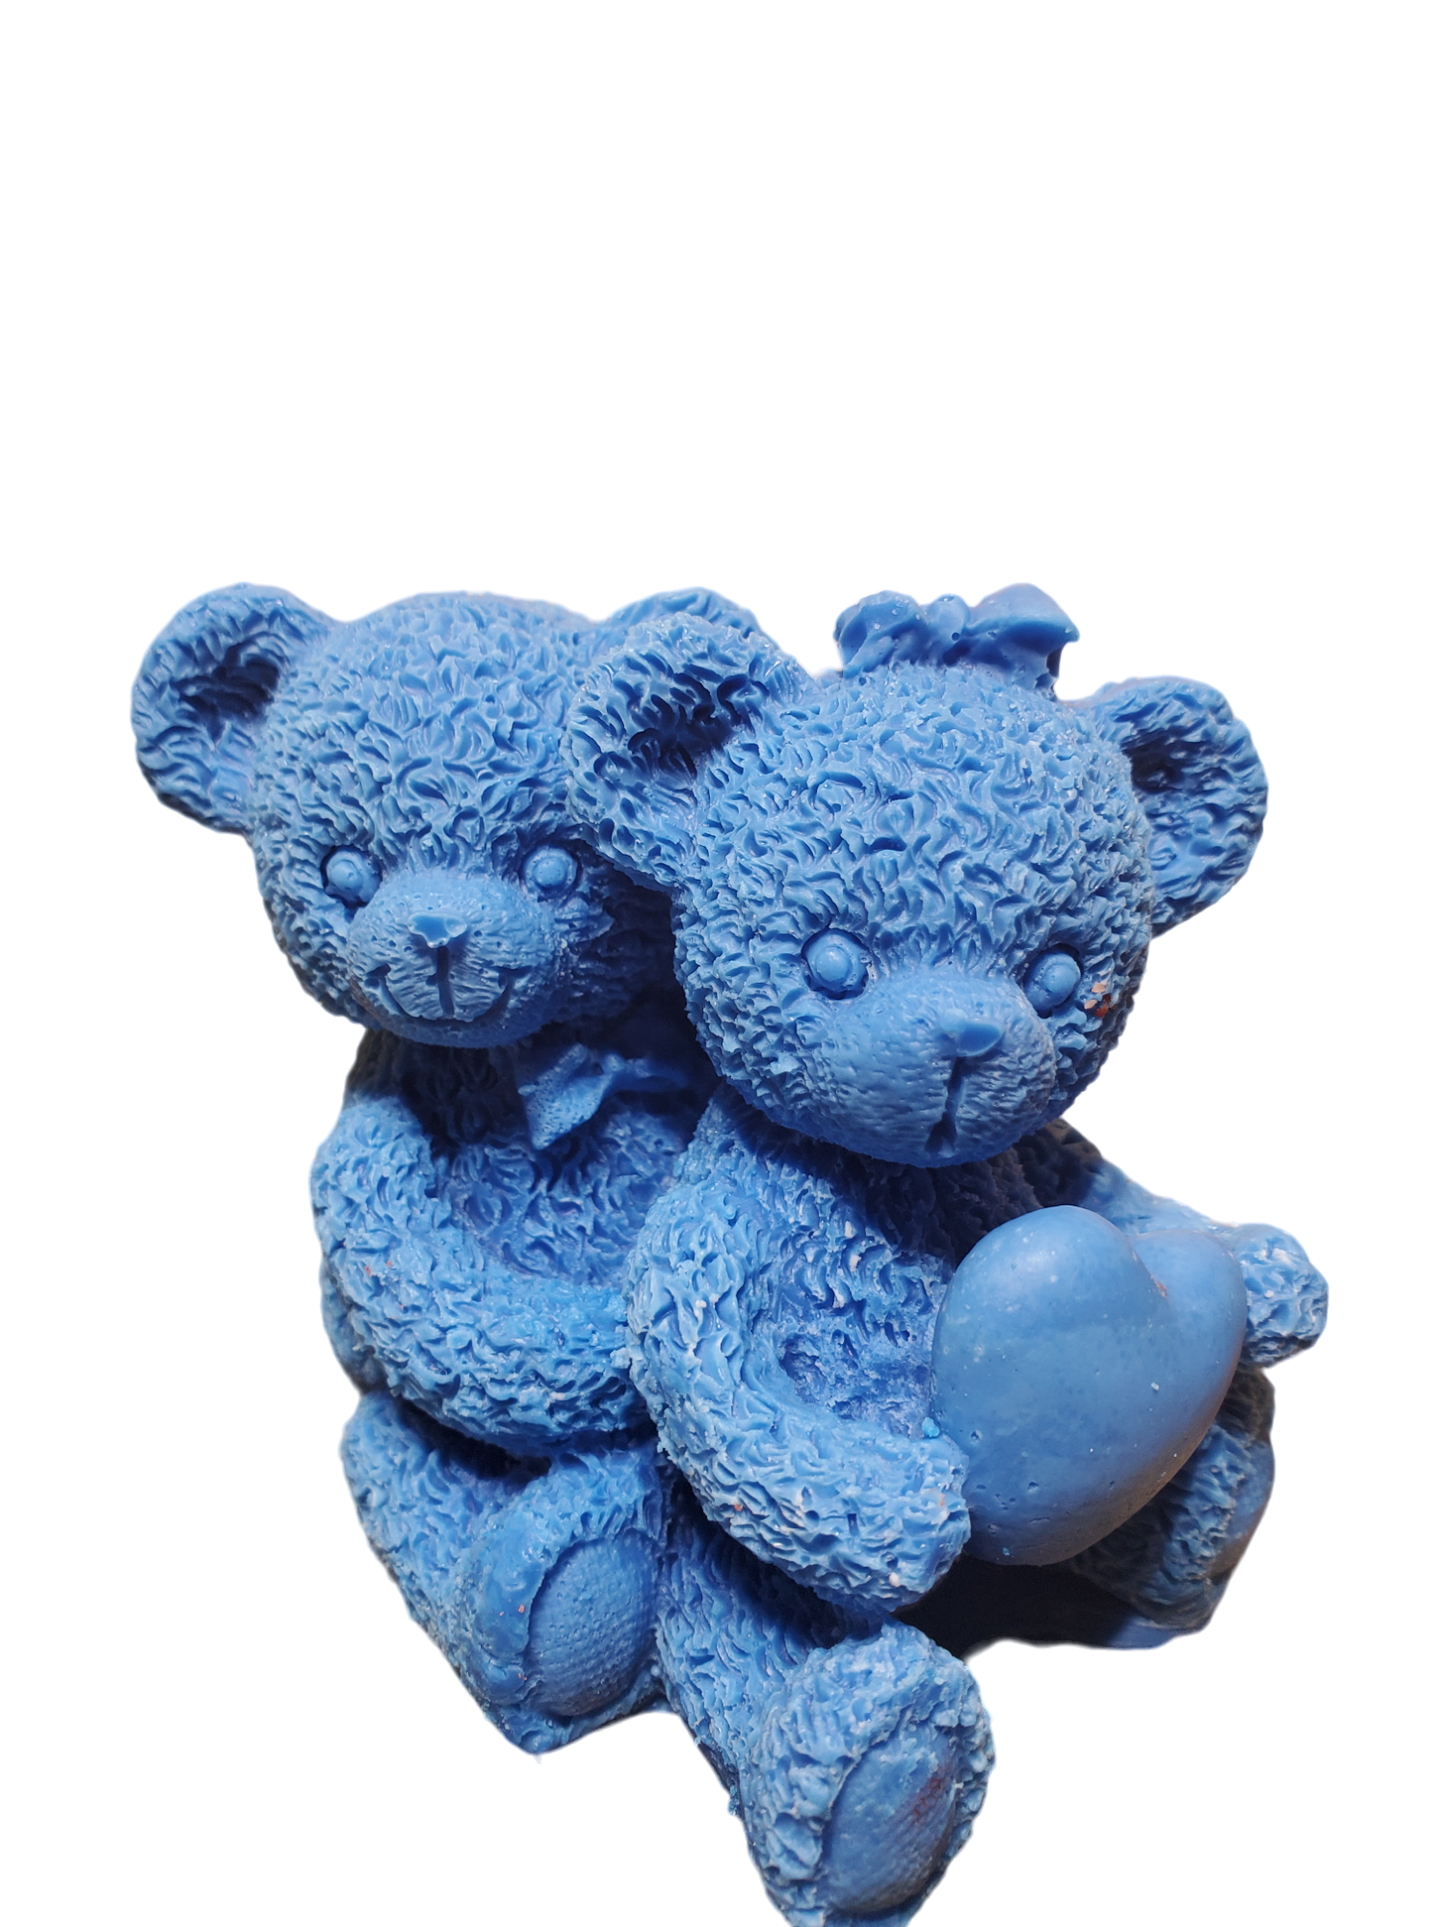 Two Bears Holding Heart